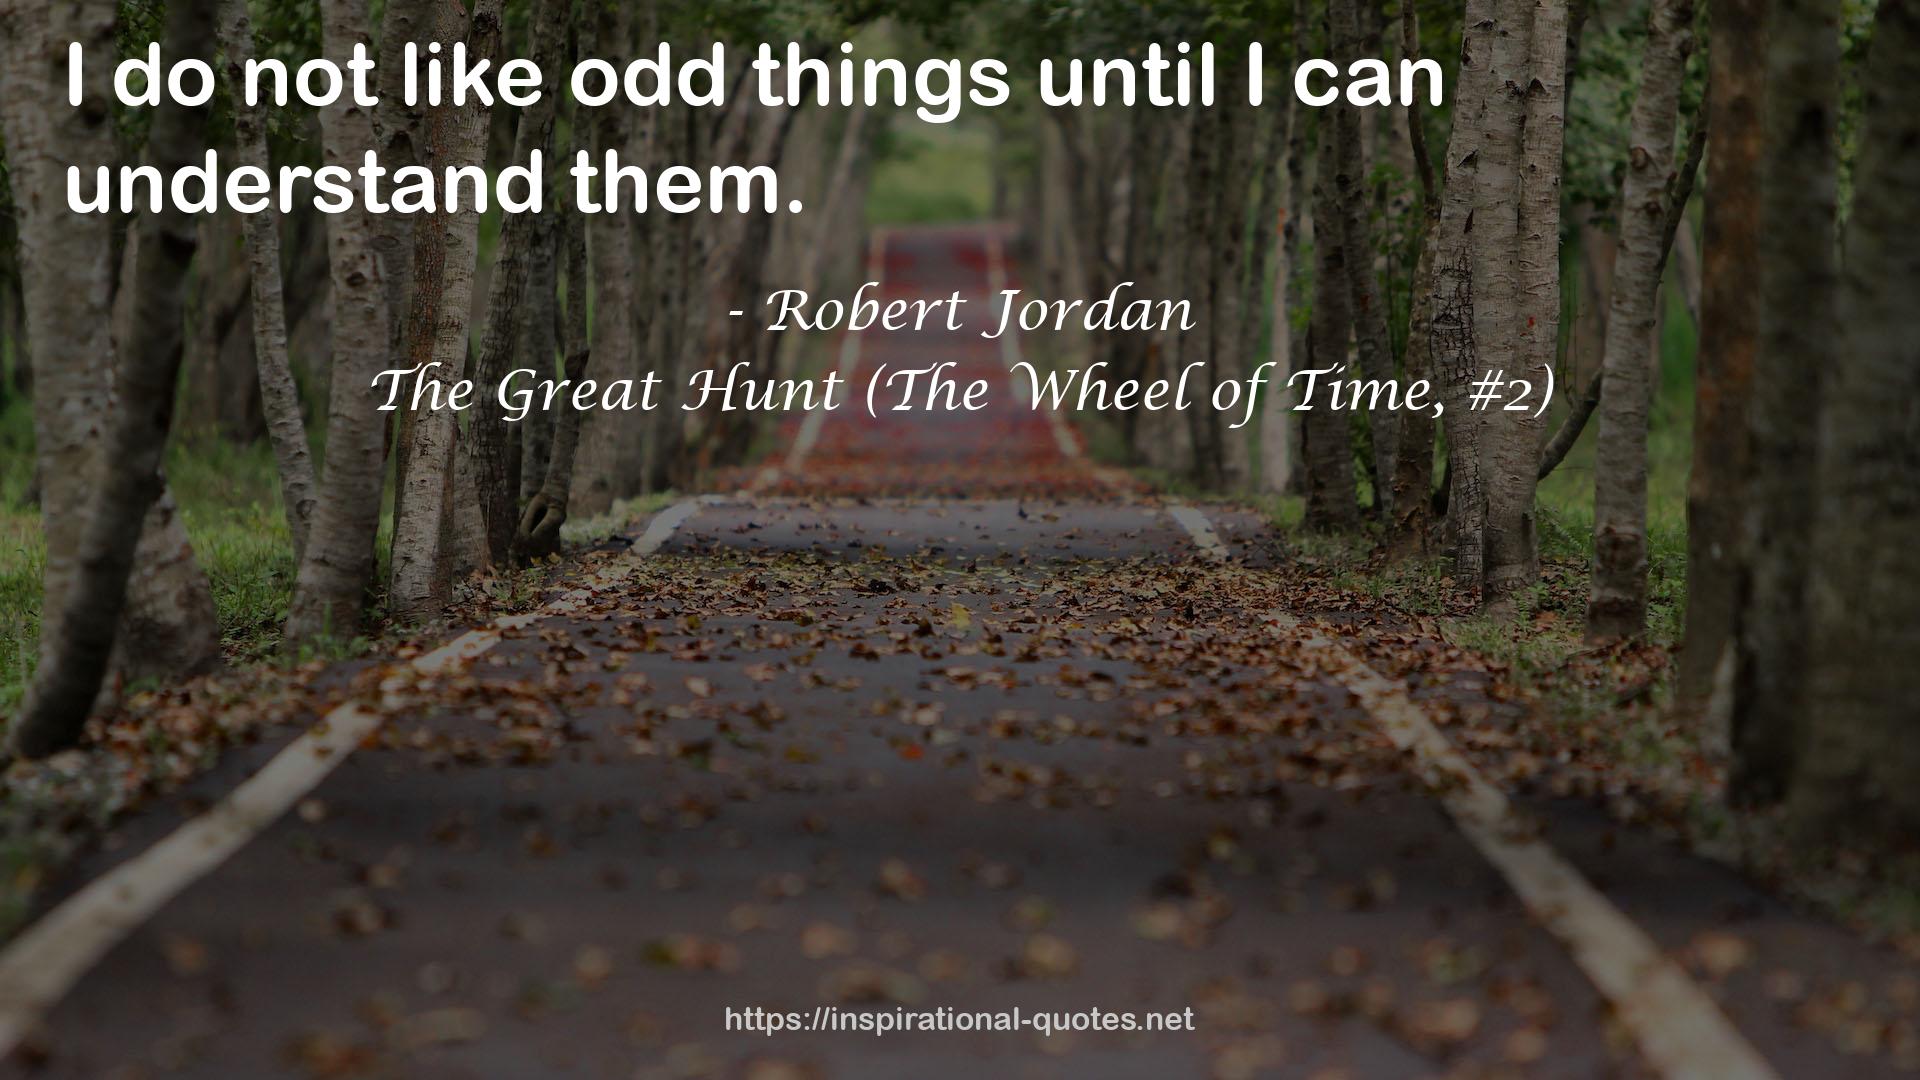 The Great Hunt (The Wheel of Time, #2) QUOTES